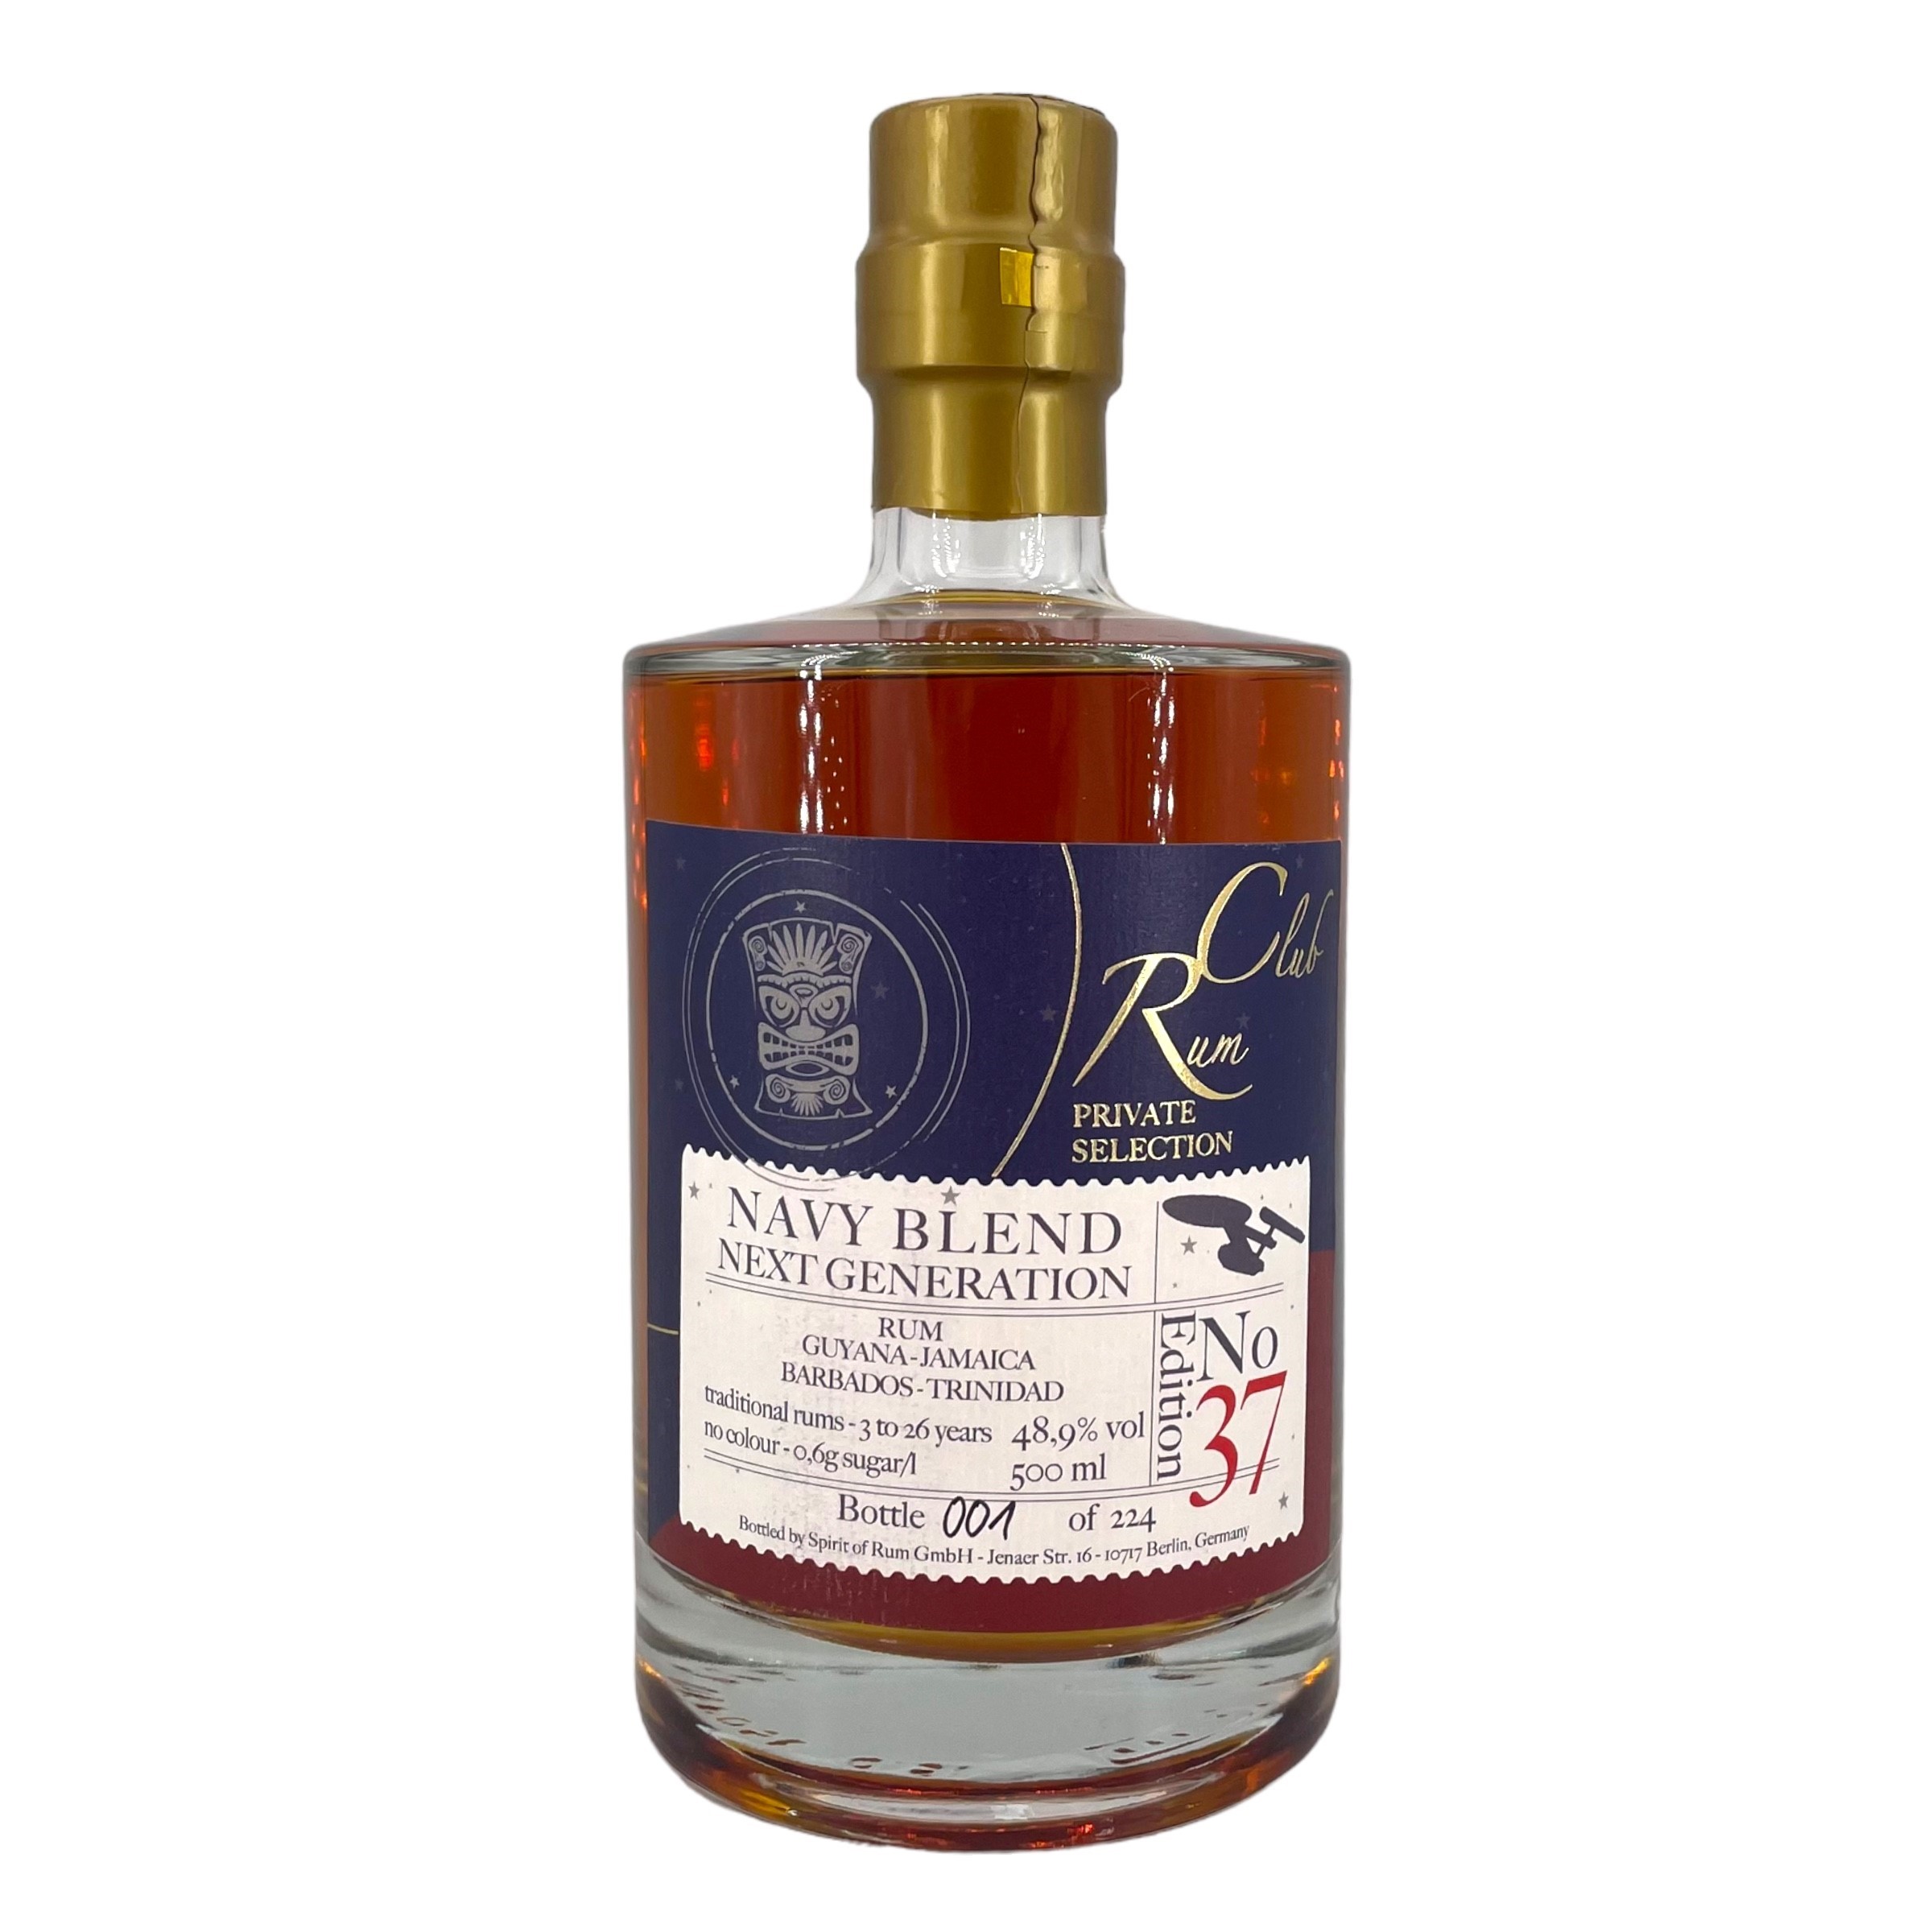 Rum Club Private Selection Edition 37 - Navy Blend - Next Generation, 48,9% Alc.Vol., Spirit of Rum